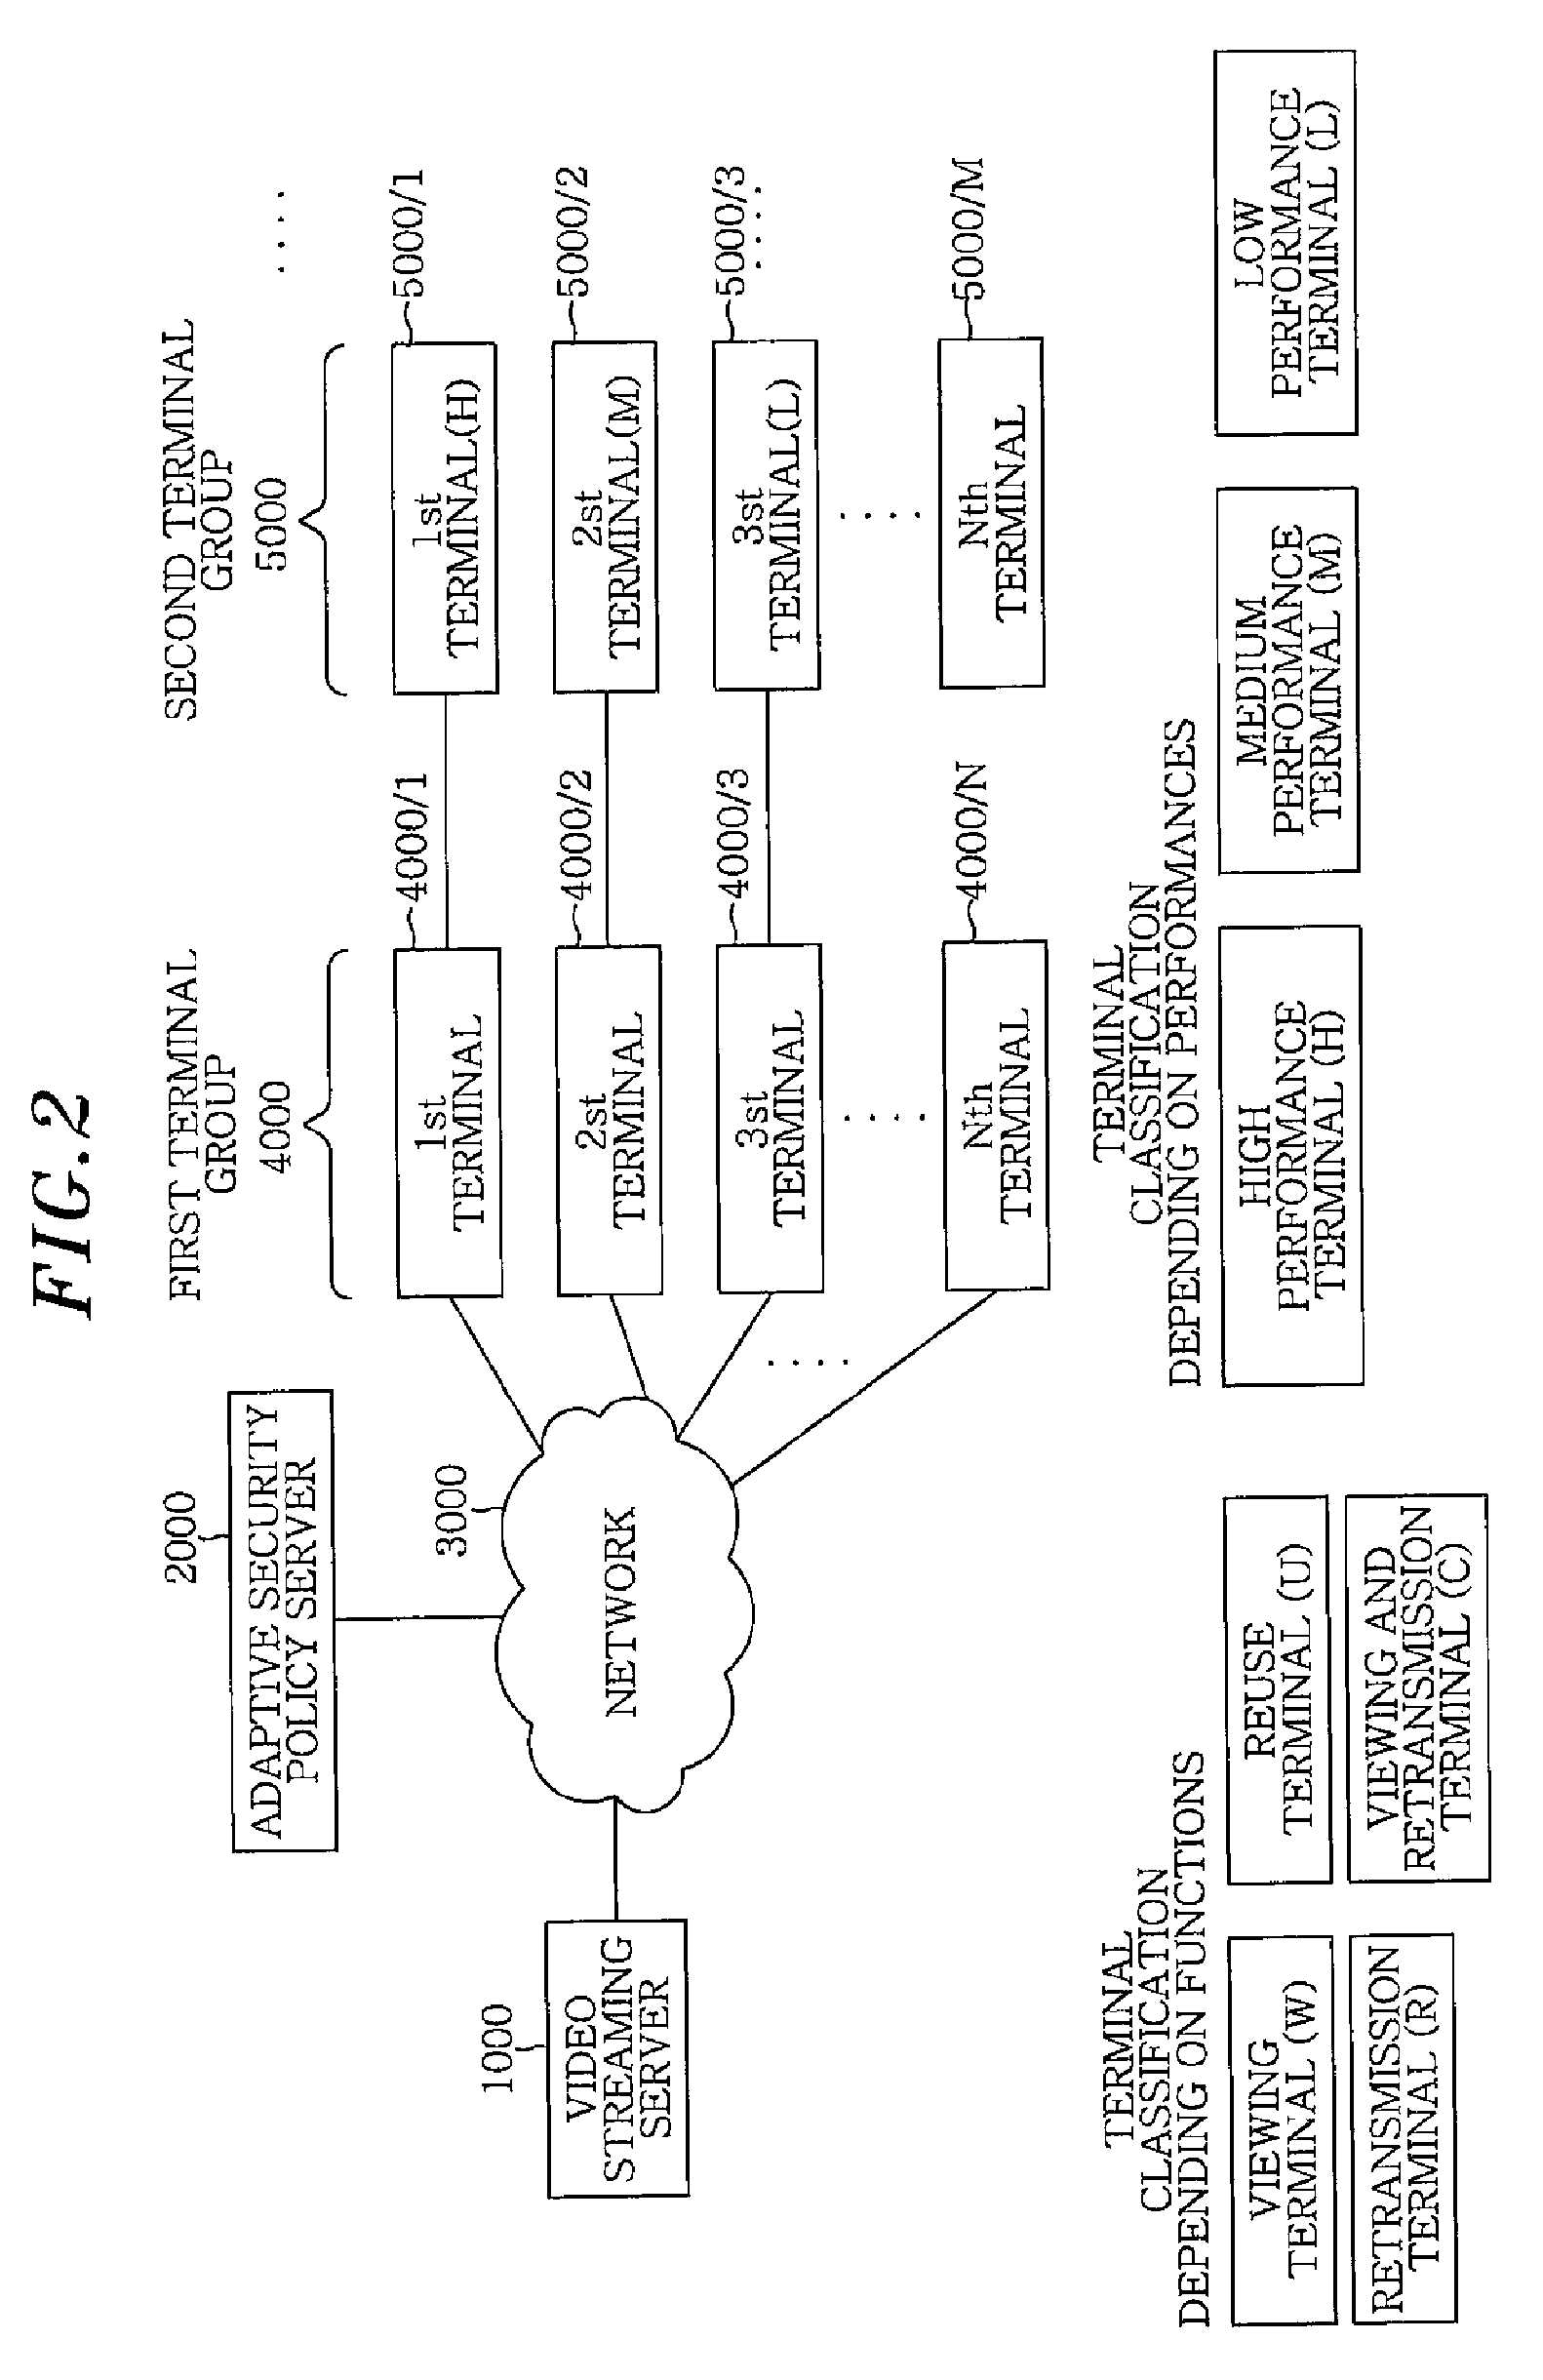 Adaptive security policy based scalable video service apparatus and method